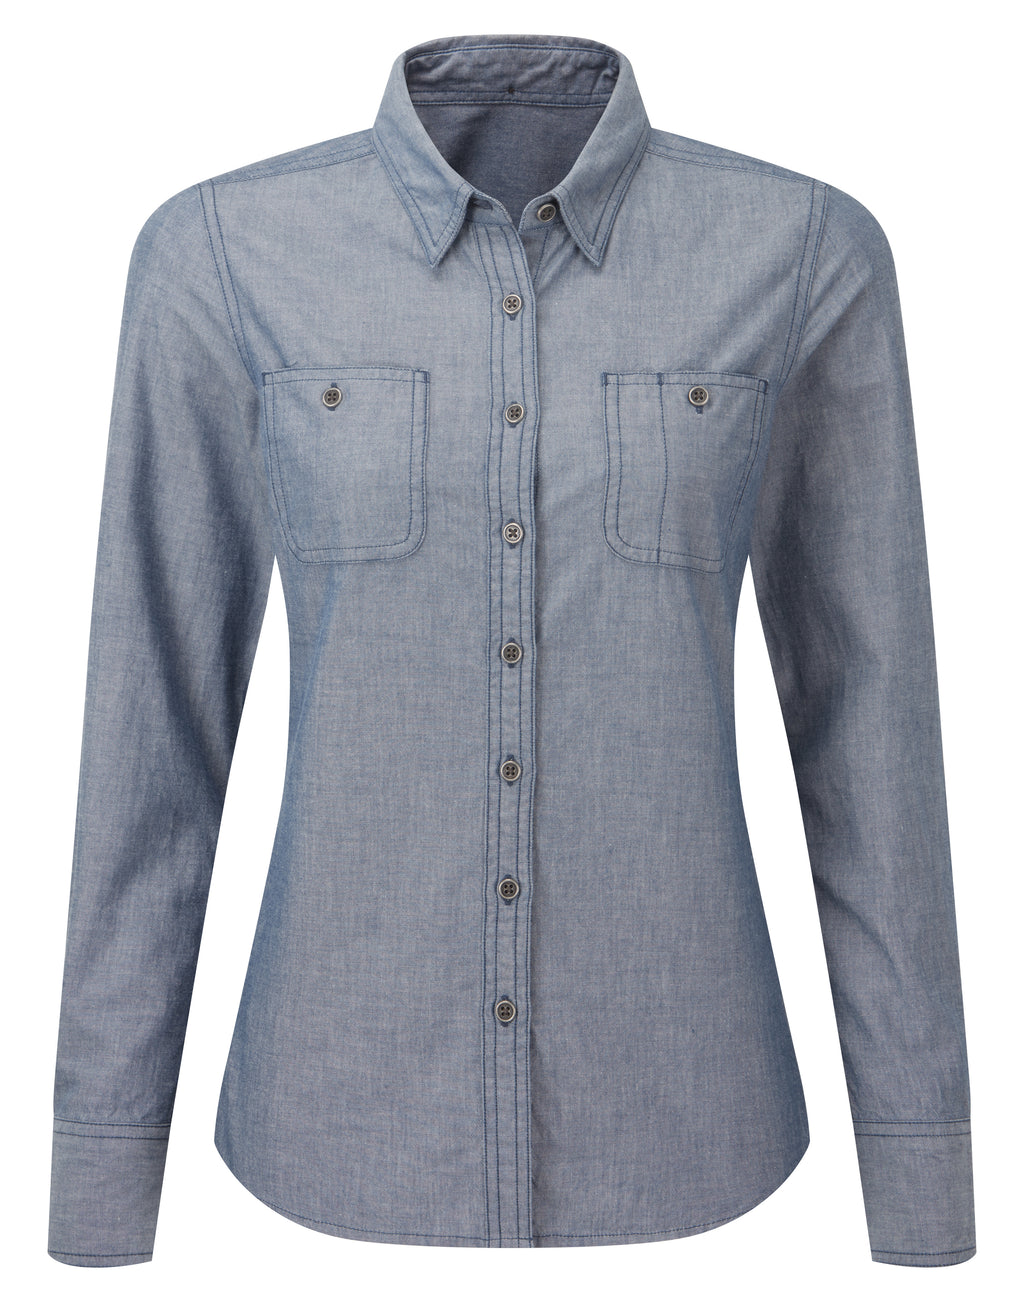 Women’s Chambray shirt, organic and Fairtrade certified - Premier Collection